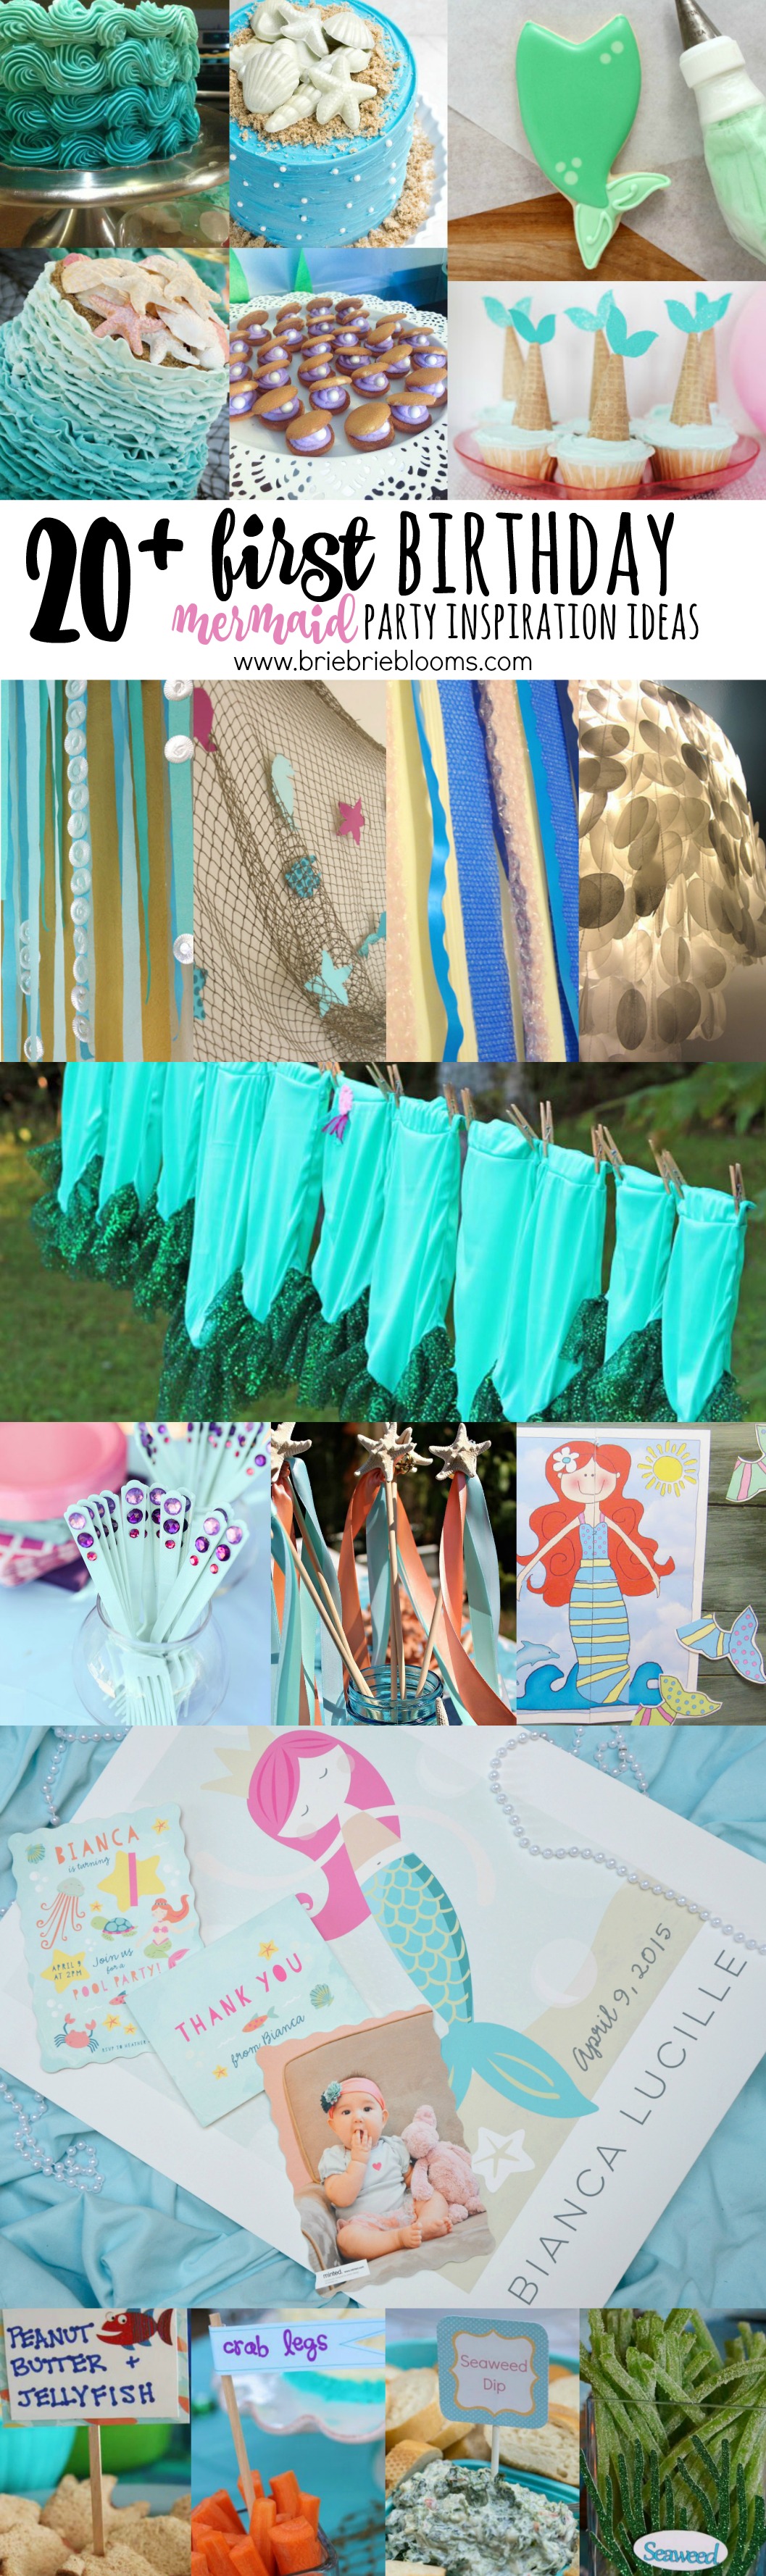 First Birthday Mermaid Party Inspiration Ideas